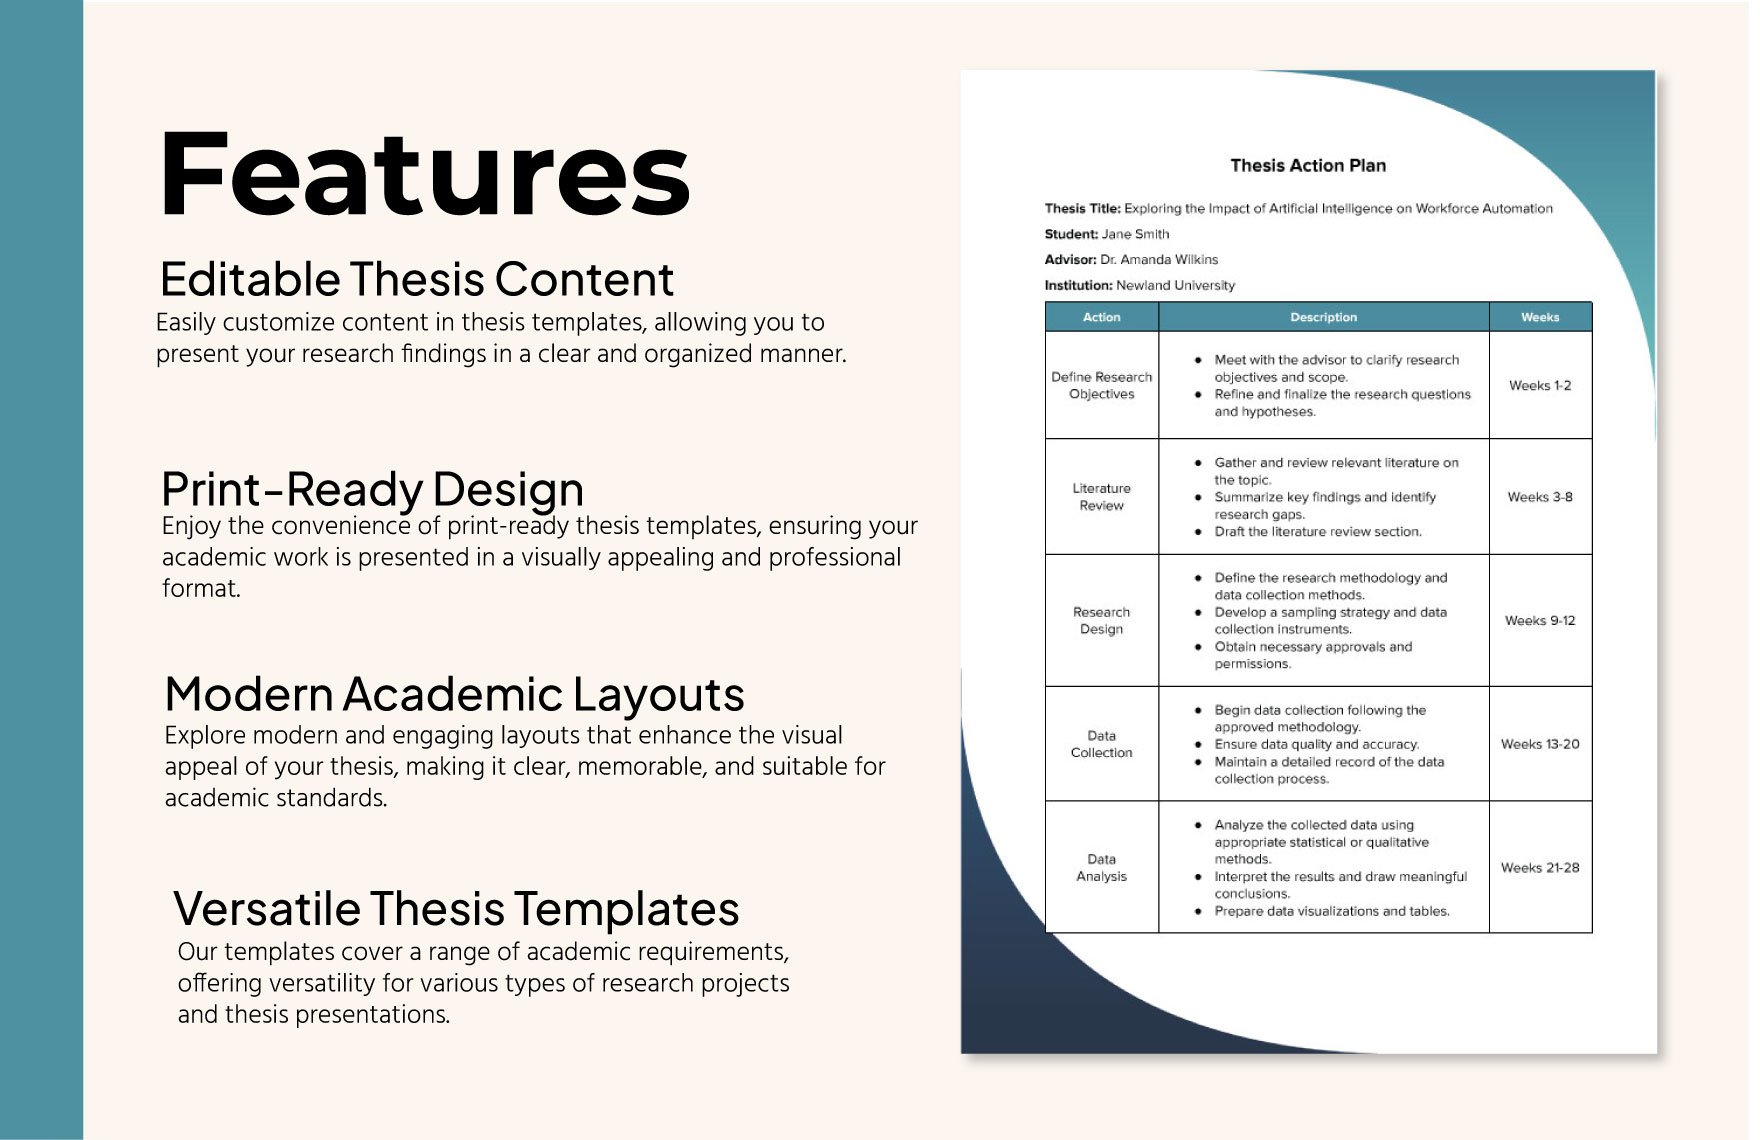 Thesis Action Plan Template